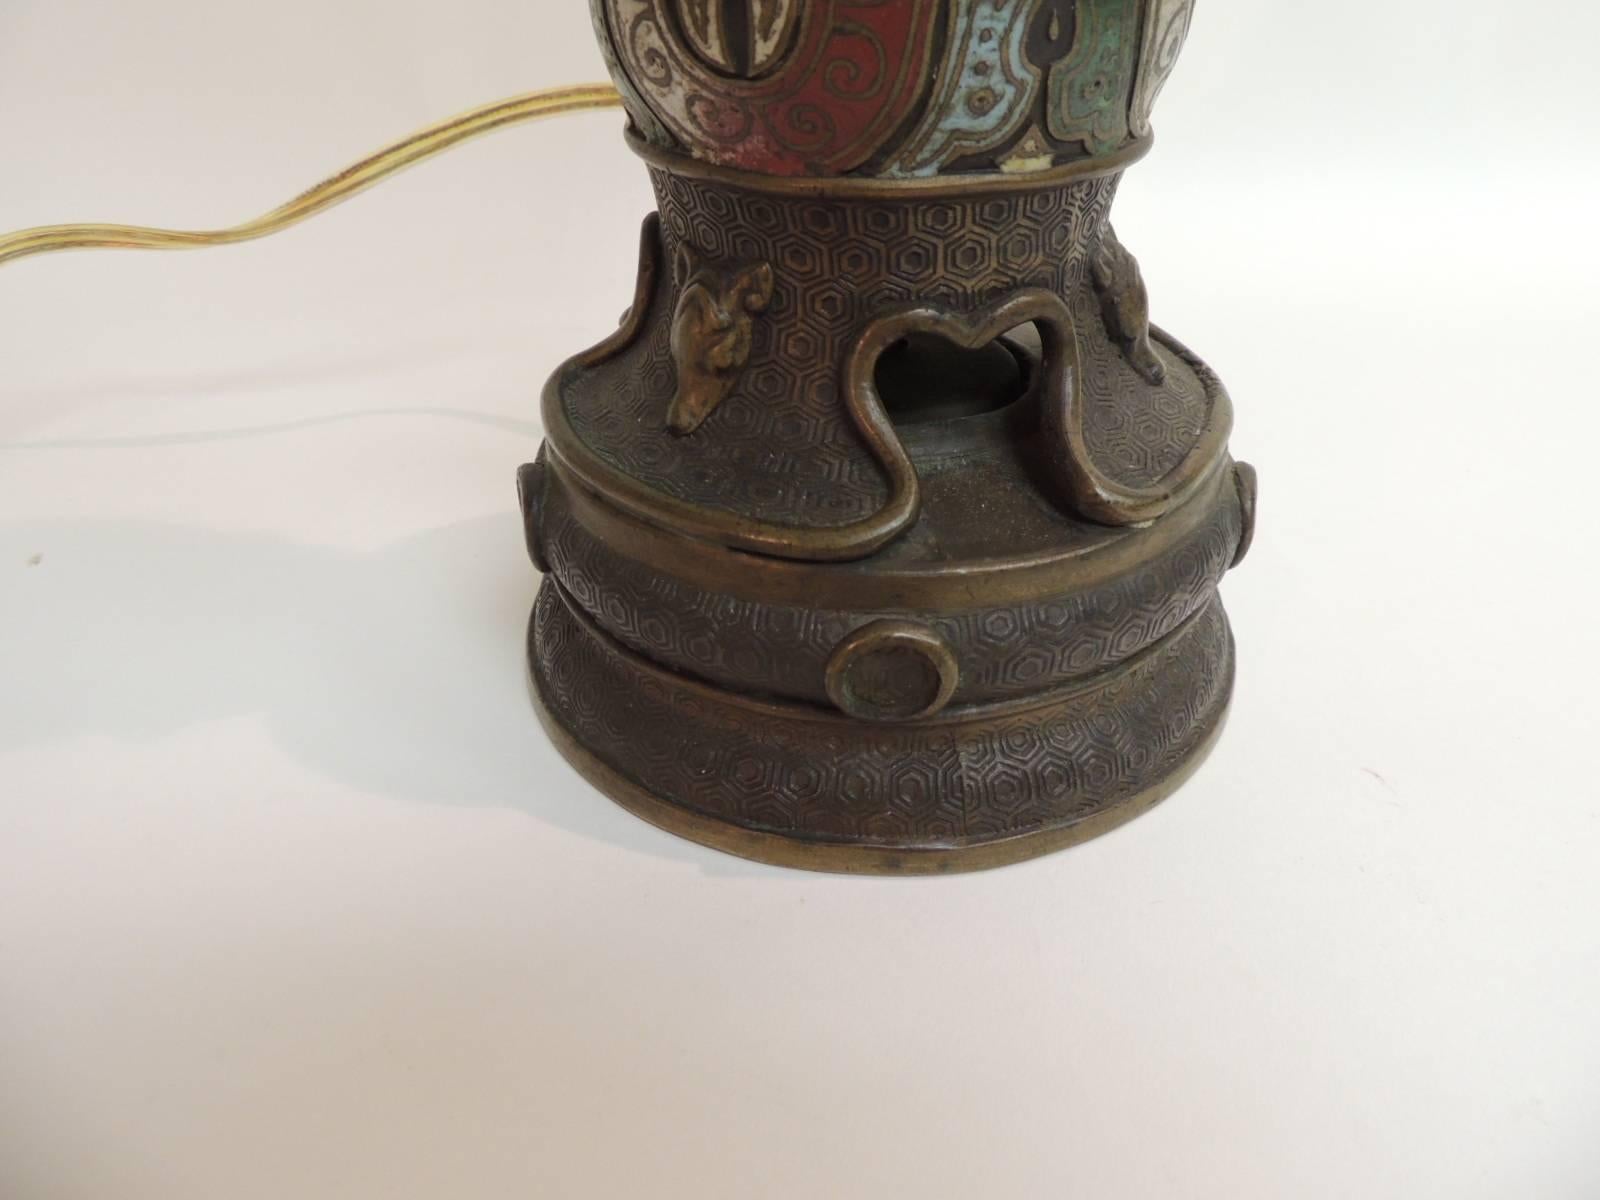 Antique bronze and Cloisonne Asian table lamp.
Antique bronze and cloisonne Asian table lamp with intricate patterns and designs. Asian antique table lamp depicting lions and dogs faces in the stylized traditional Japanese fashion. No shade or harp.